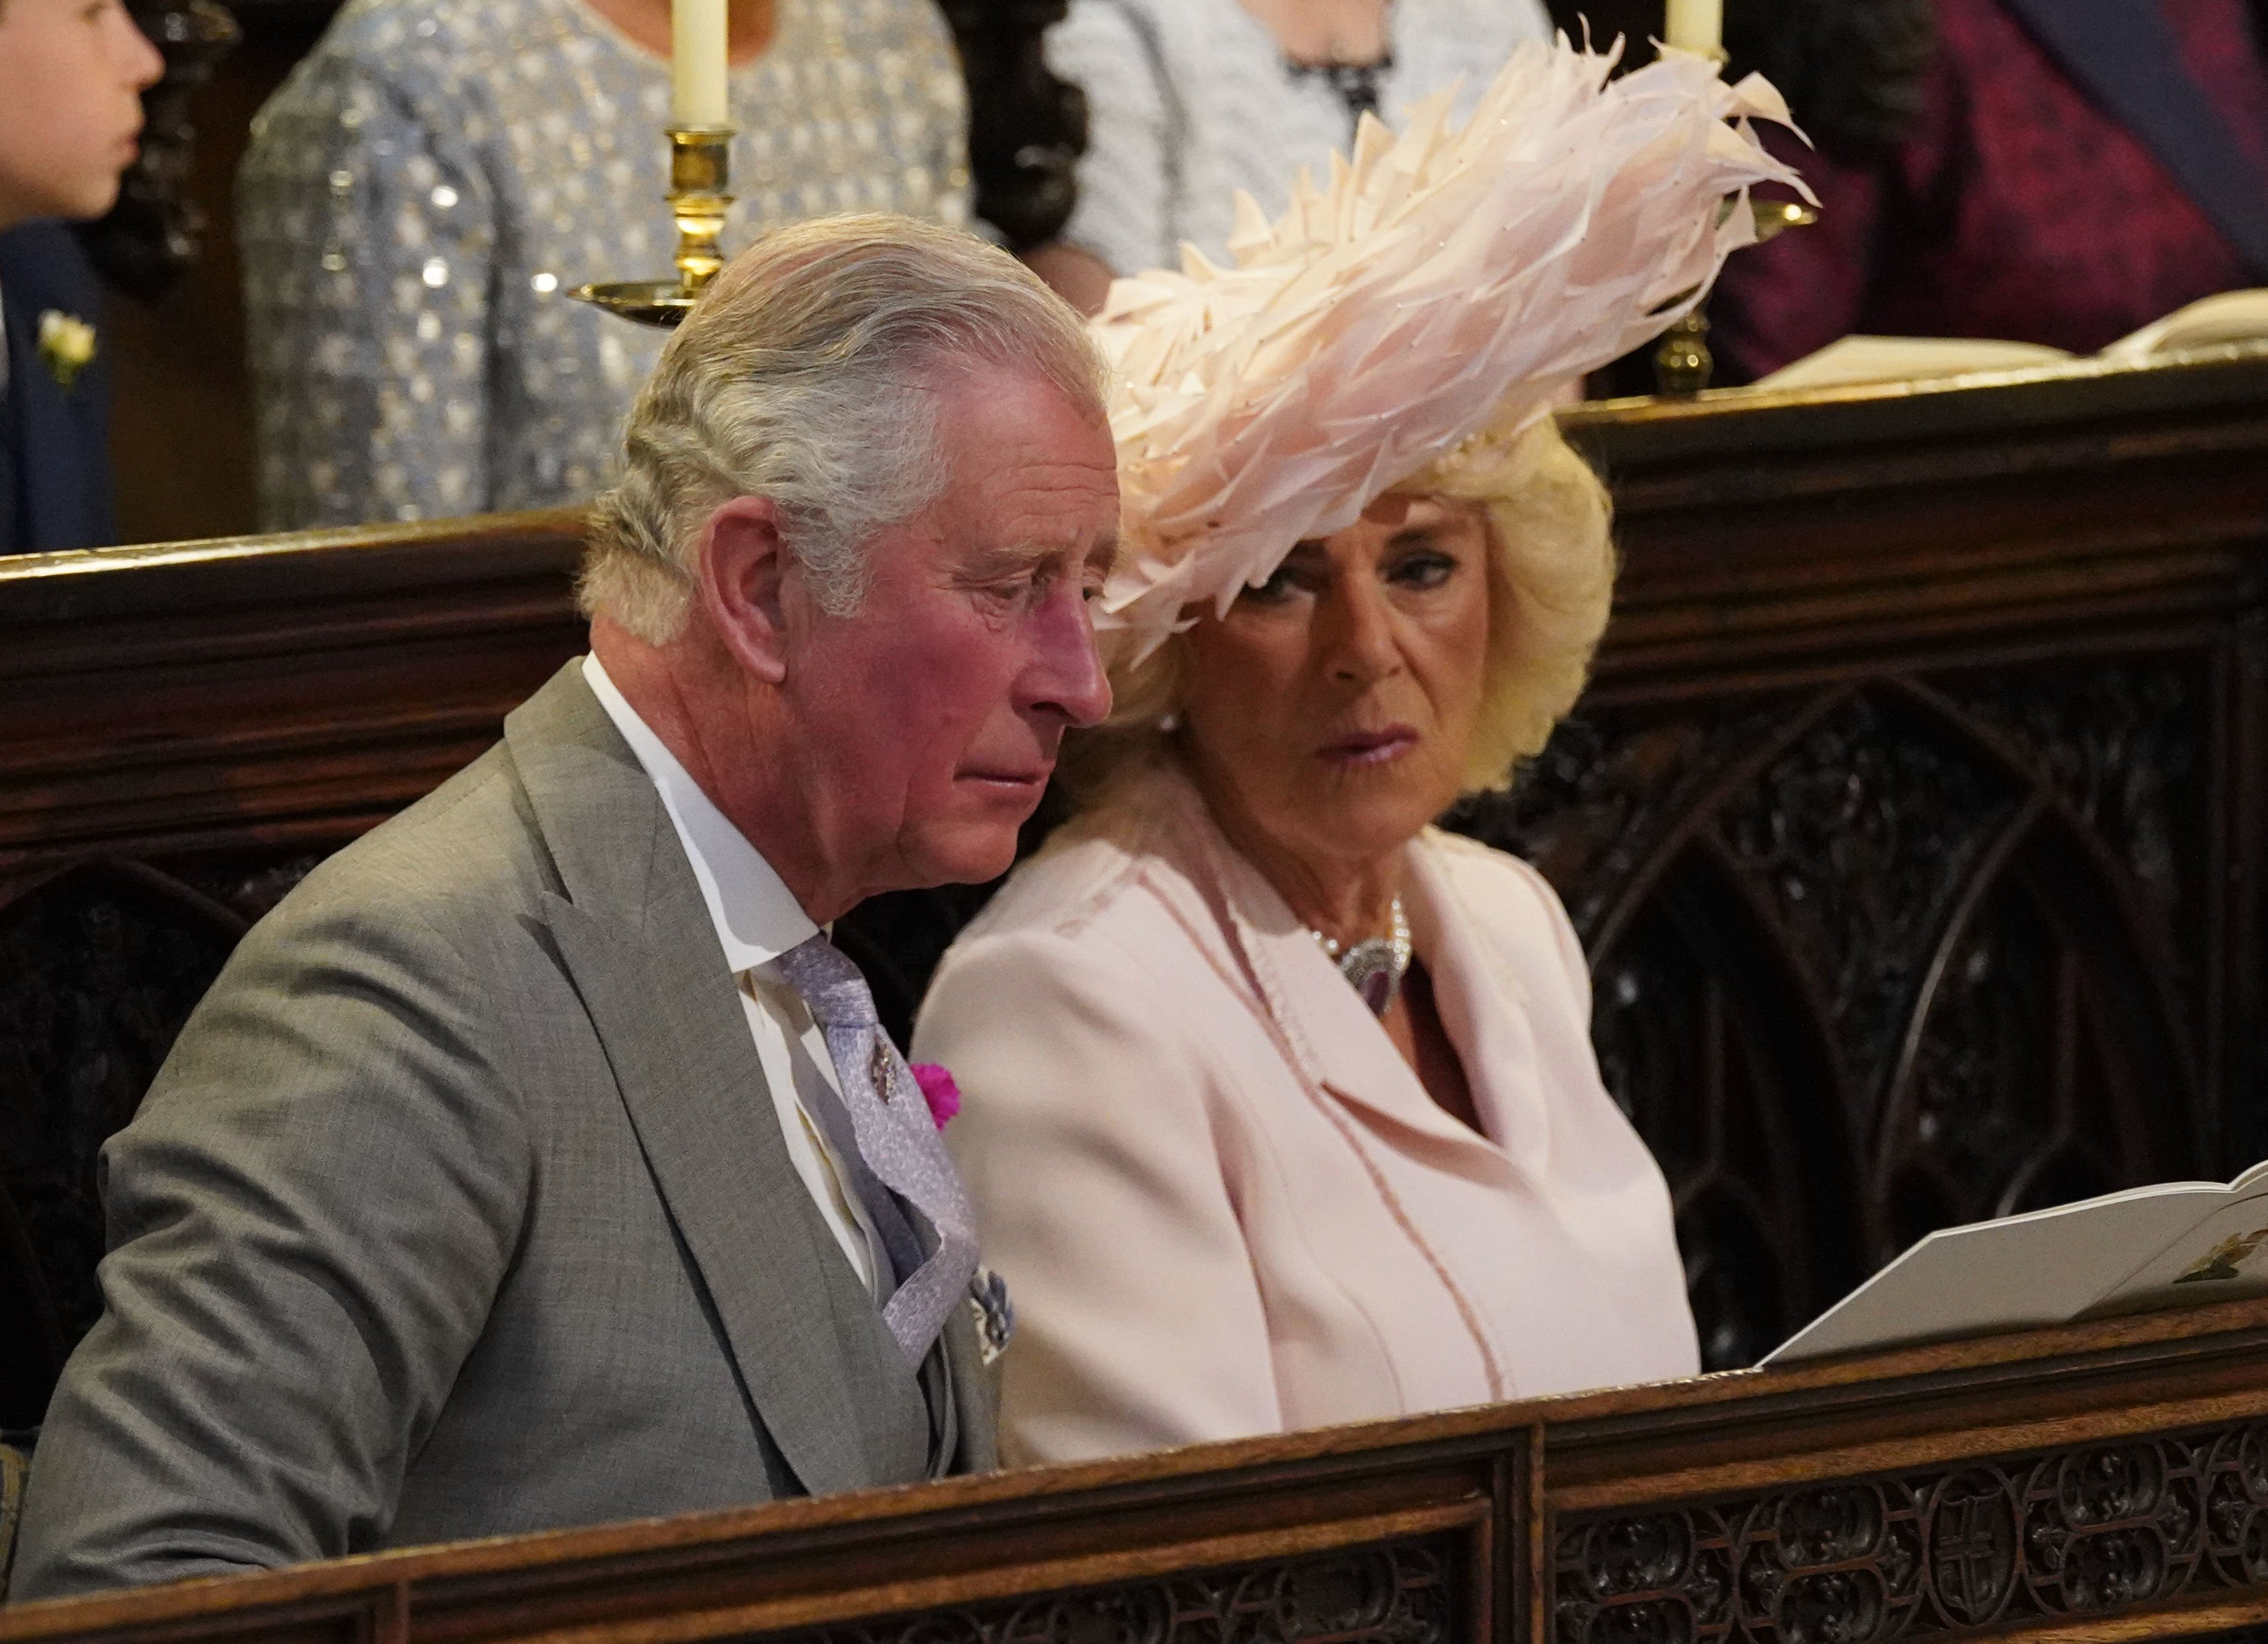 Prince Charles and Camilla, Duchess of Cornwall in the chapel for the wedding ceremony of Prince Harry, Duke of Sussex and US actress Meghan Markle in St George's Chapel, Windsor Castle, on May 19, 2018. | Source: Getty Images.